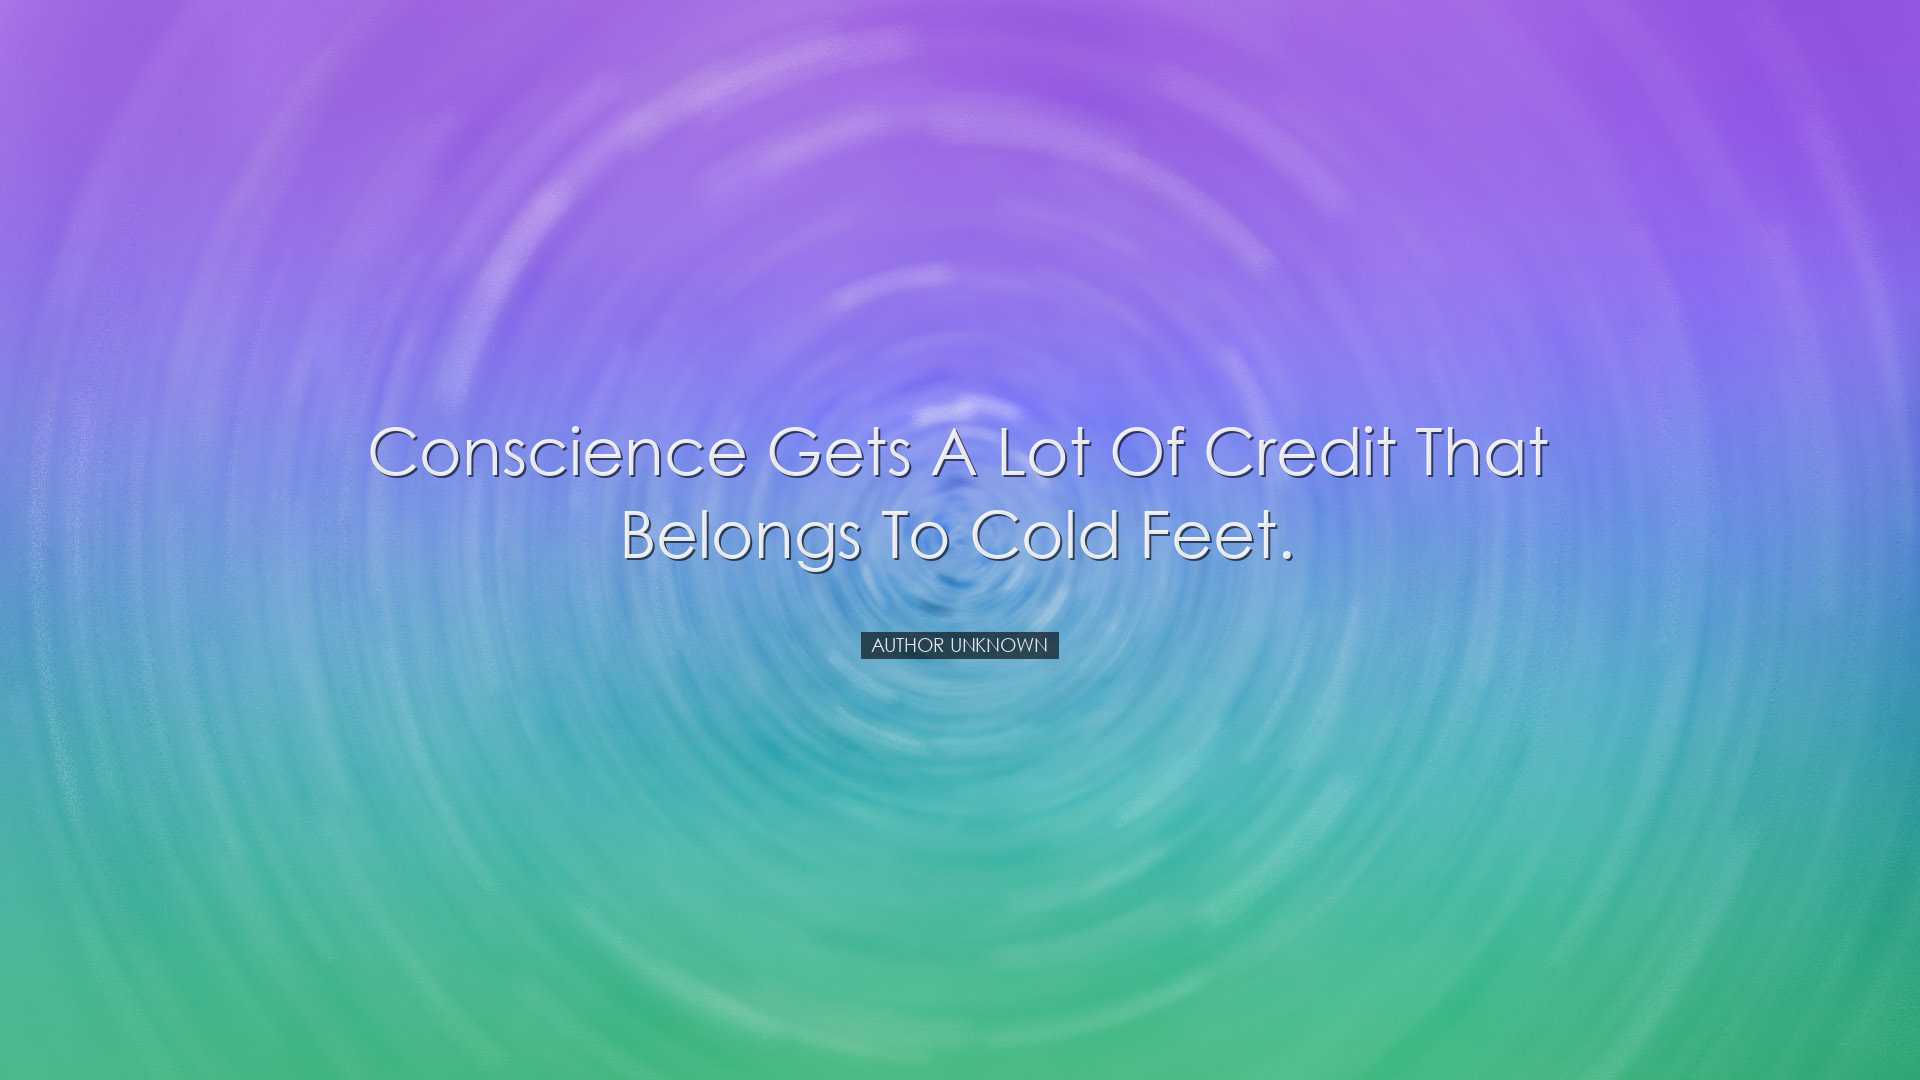 Conscience gets a lot of credit that belongs to cold feet. - Autho